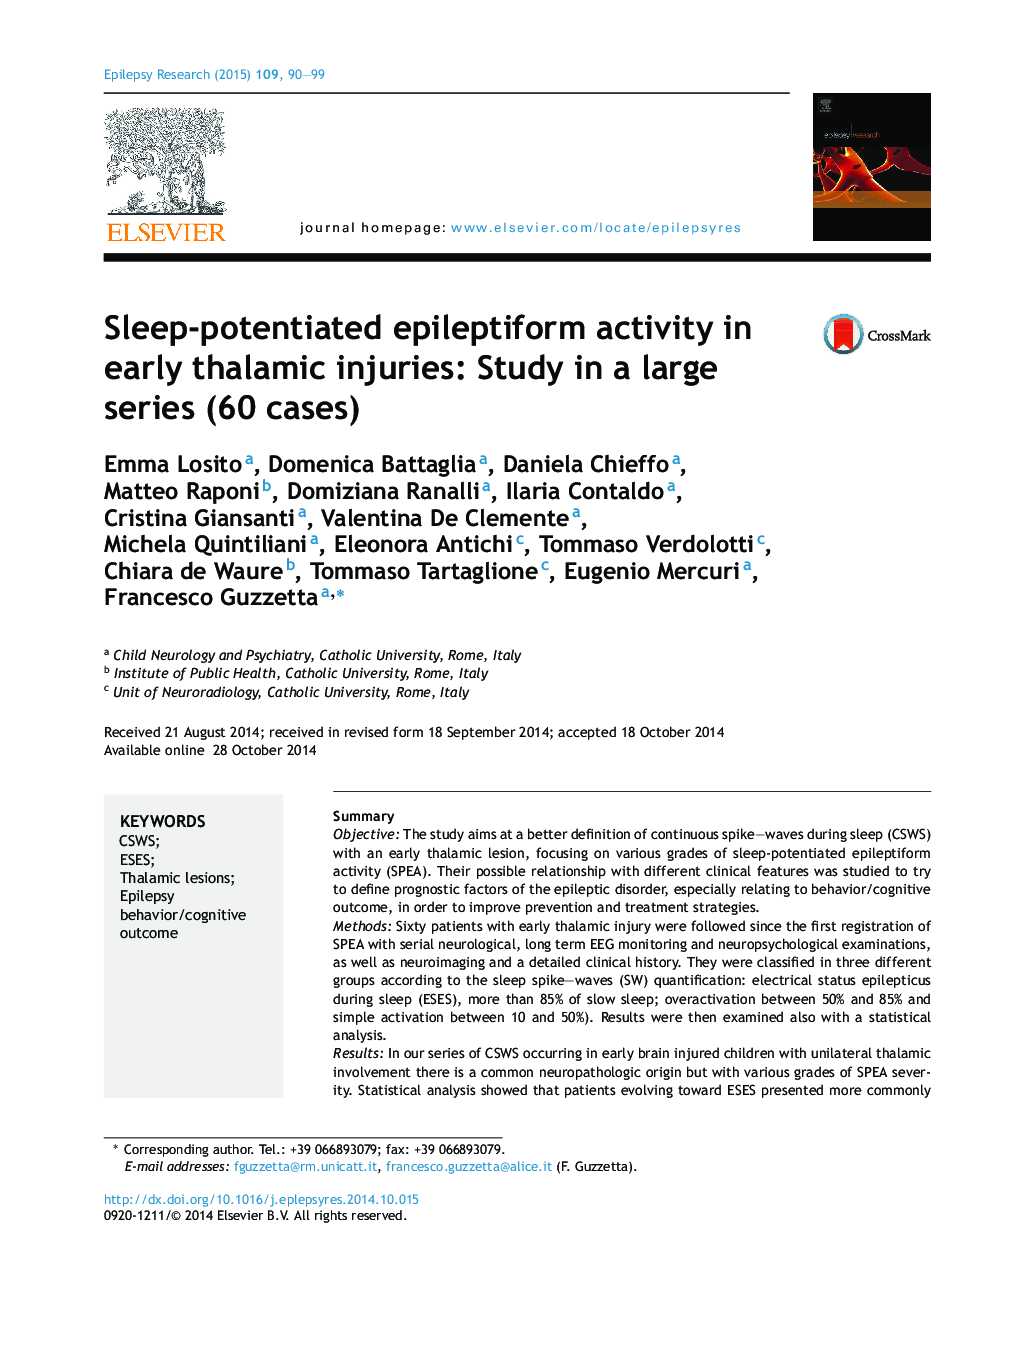 Sleep-potentiated epileptiform activity in early thalamic injuries: Study in a large series (60 cases)